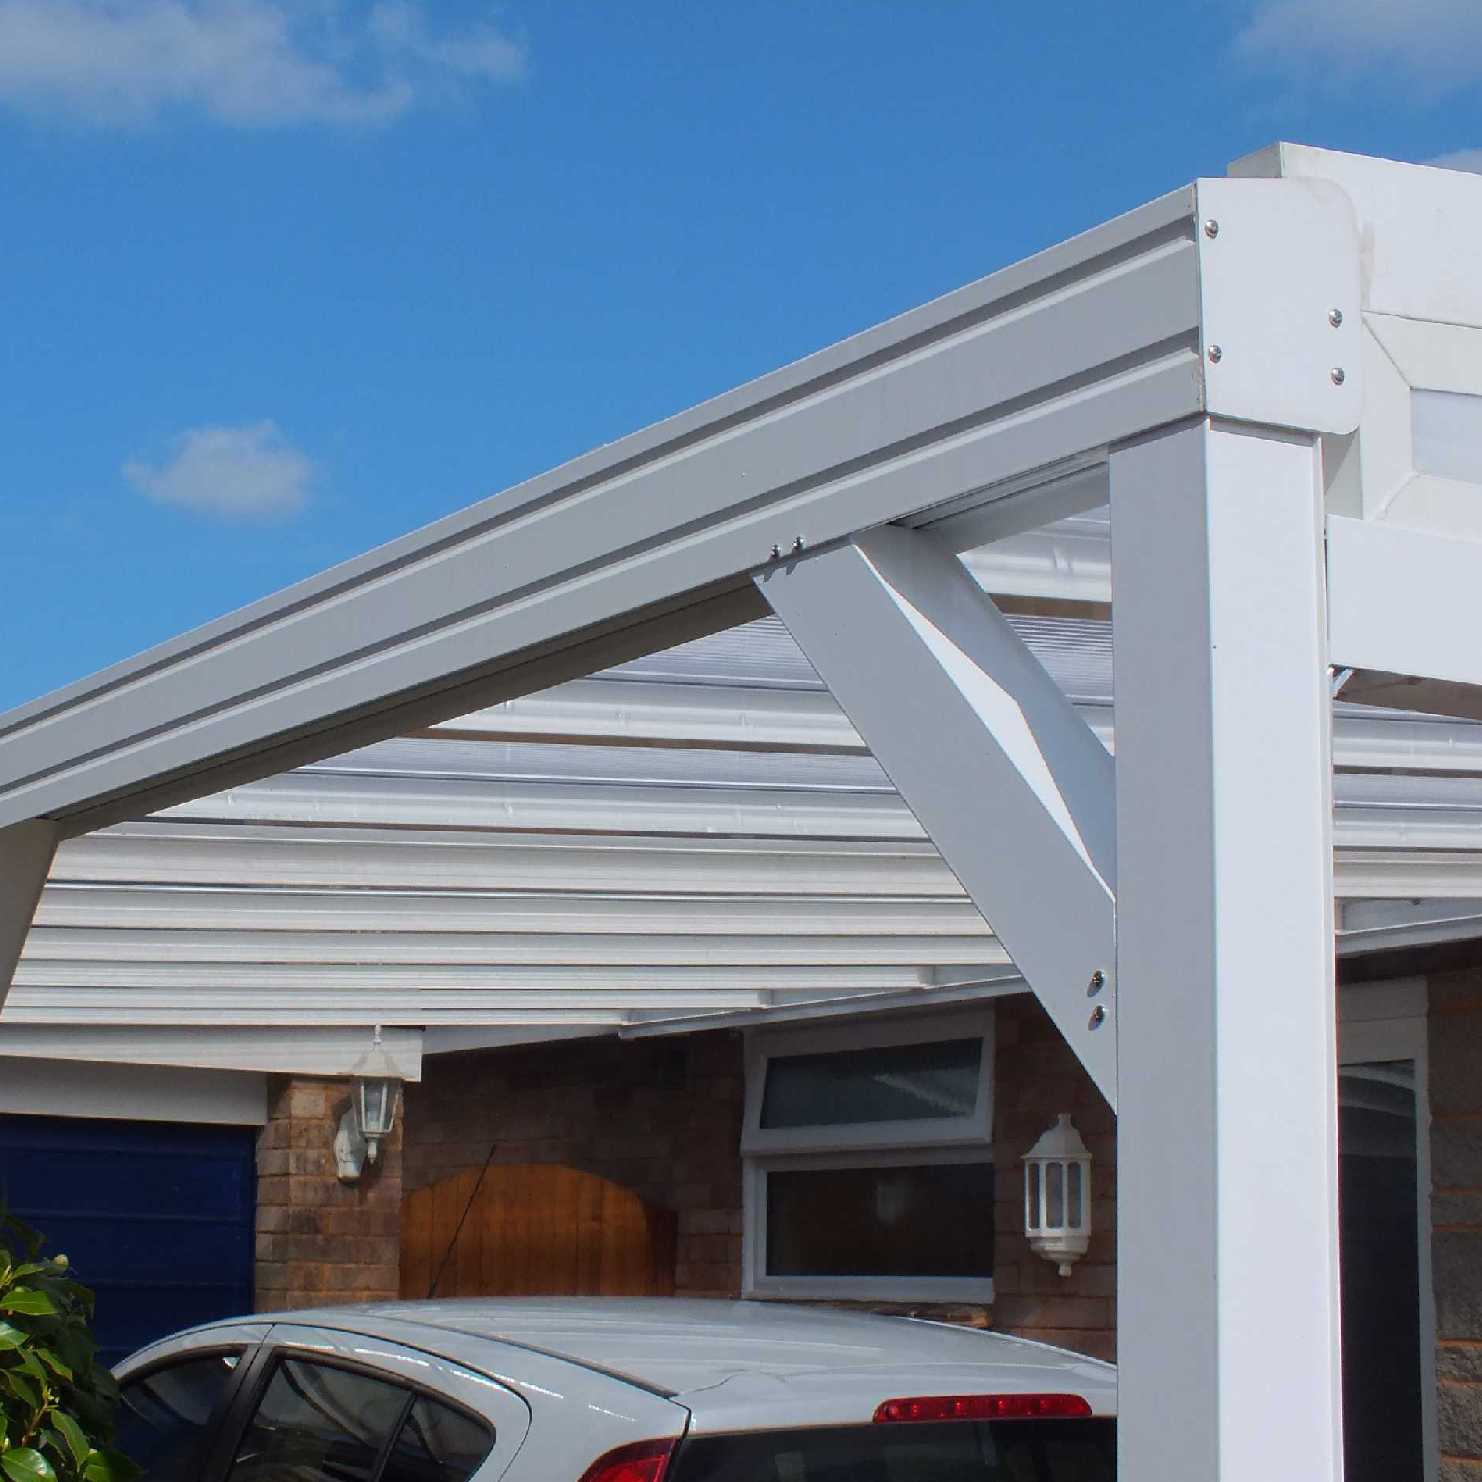 Buy Omega Smart Lean-To Canopy, White with 16mm Polycarbonate Glazing - 4.2m (W) x 2.5m (P), (3) Supporting Posts online today